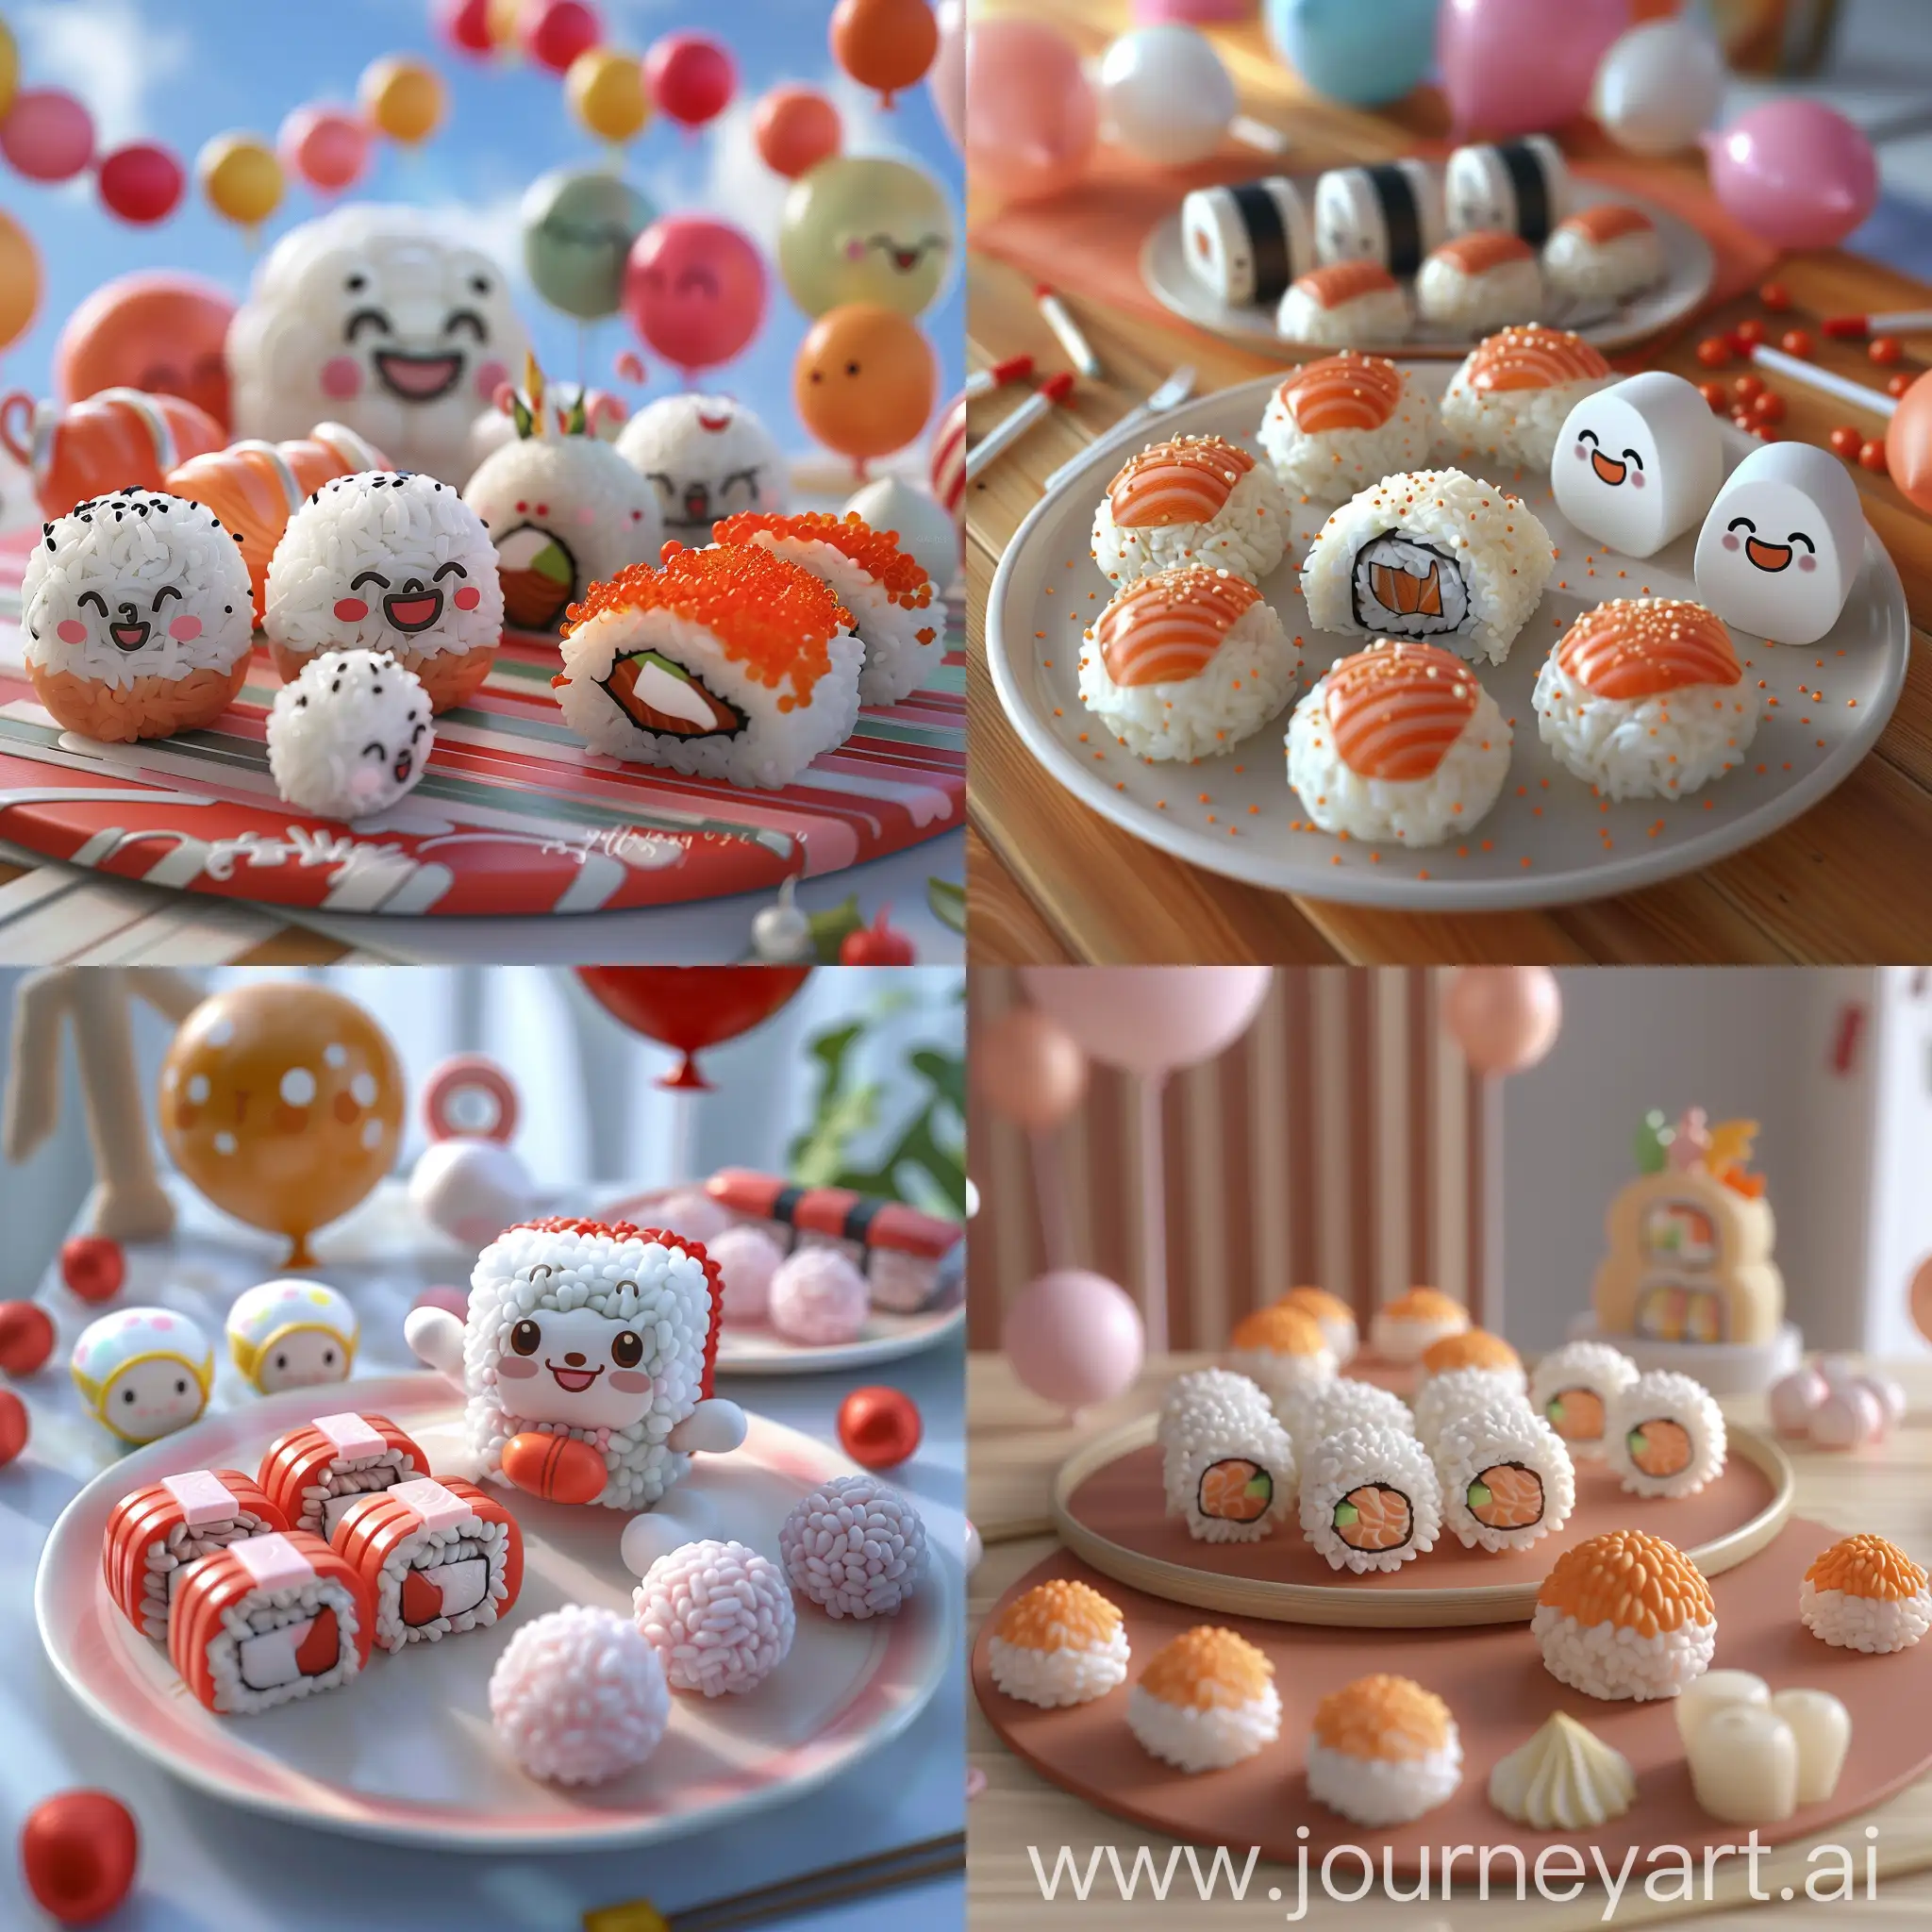 there are sushi and rice balls on a plate with a sushi, cute 3 d render, cute, hyperrealistic, lush, cinematic, c4d, 4k polymer clay food photography, sushi, anime food, kawaii hq render, pop japonisme 3 d ultra detailed, kenny wong x pop mart, kawaai, kawaii japanese style, kawaii, japanese kawaii style, super realistic food picture, birthday, balloons, holiday, hyper realism , realistic